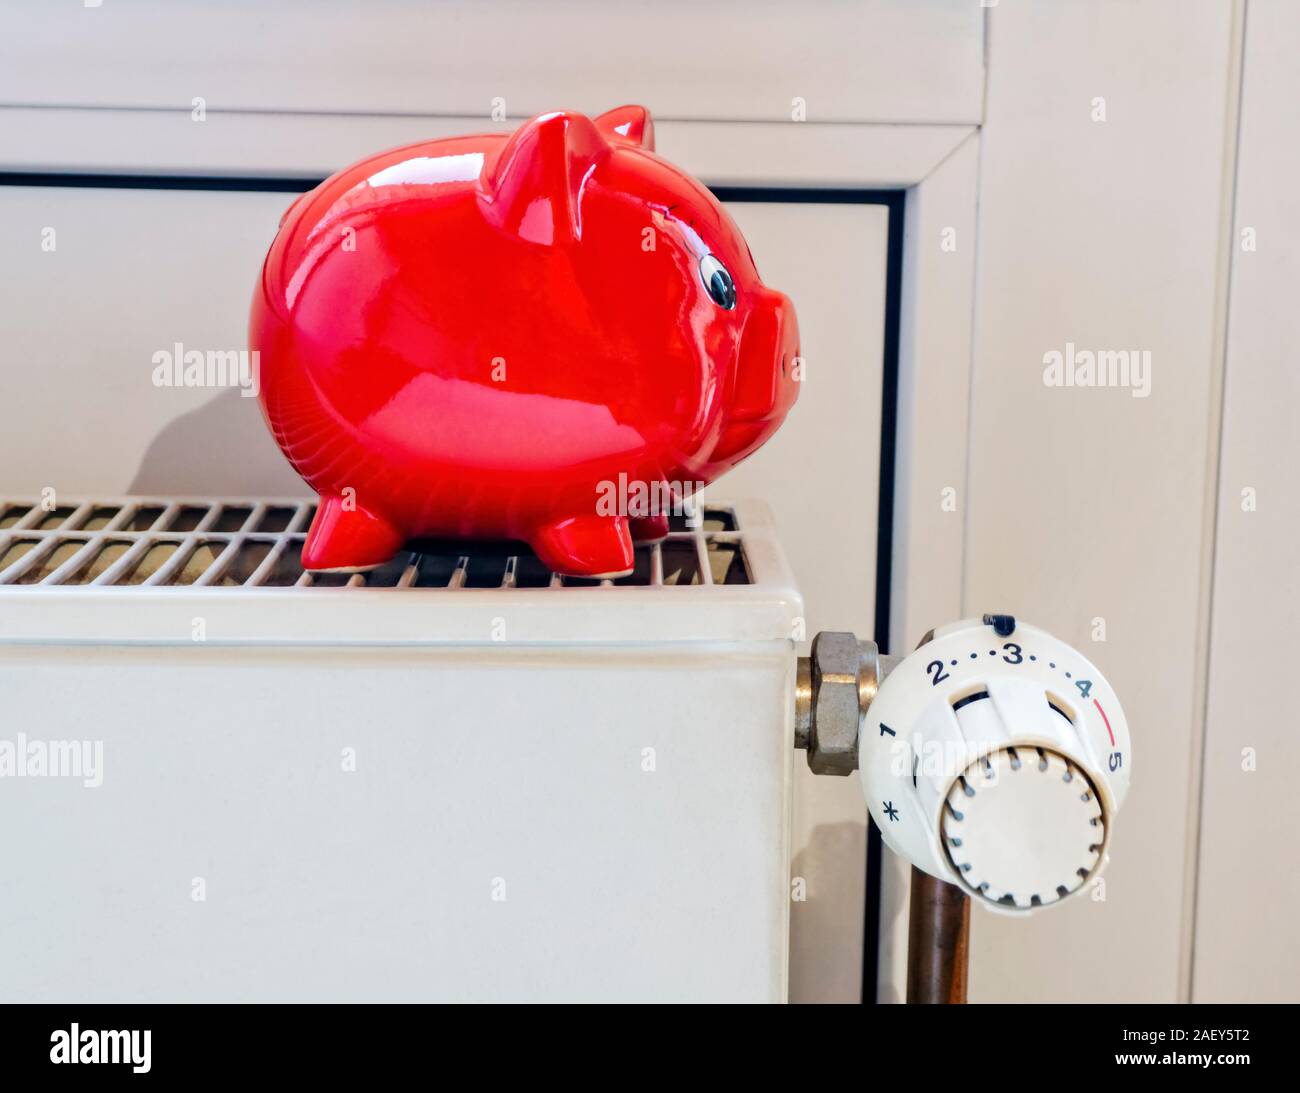 Red piggy bank stands on a heating with thermostat Stock Photo